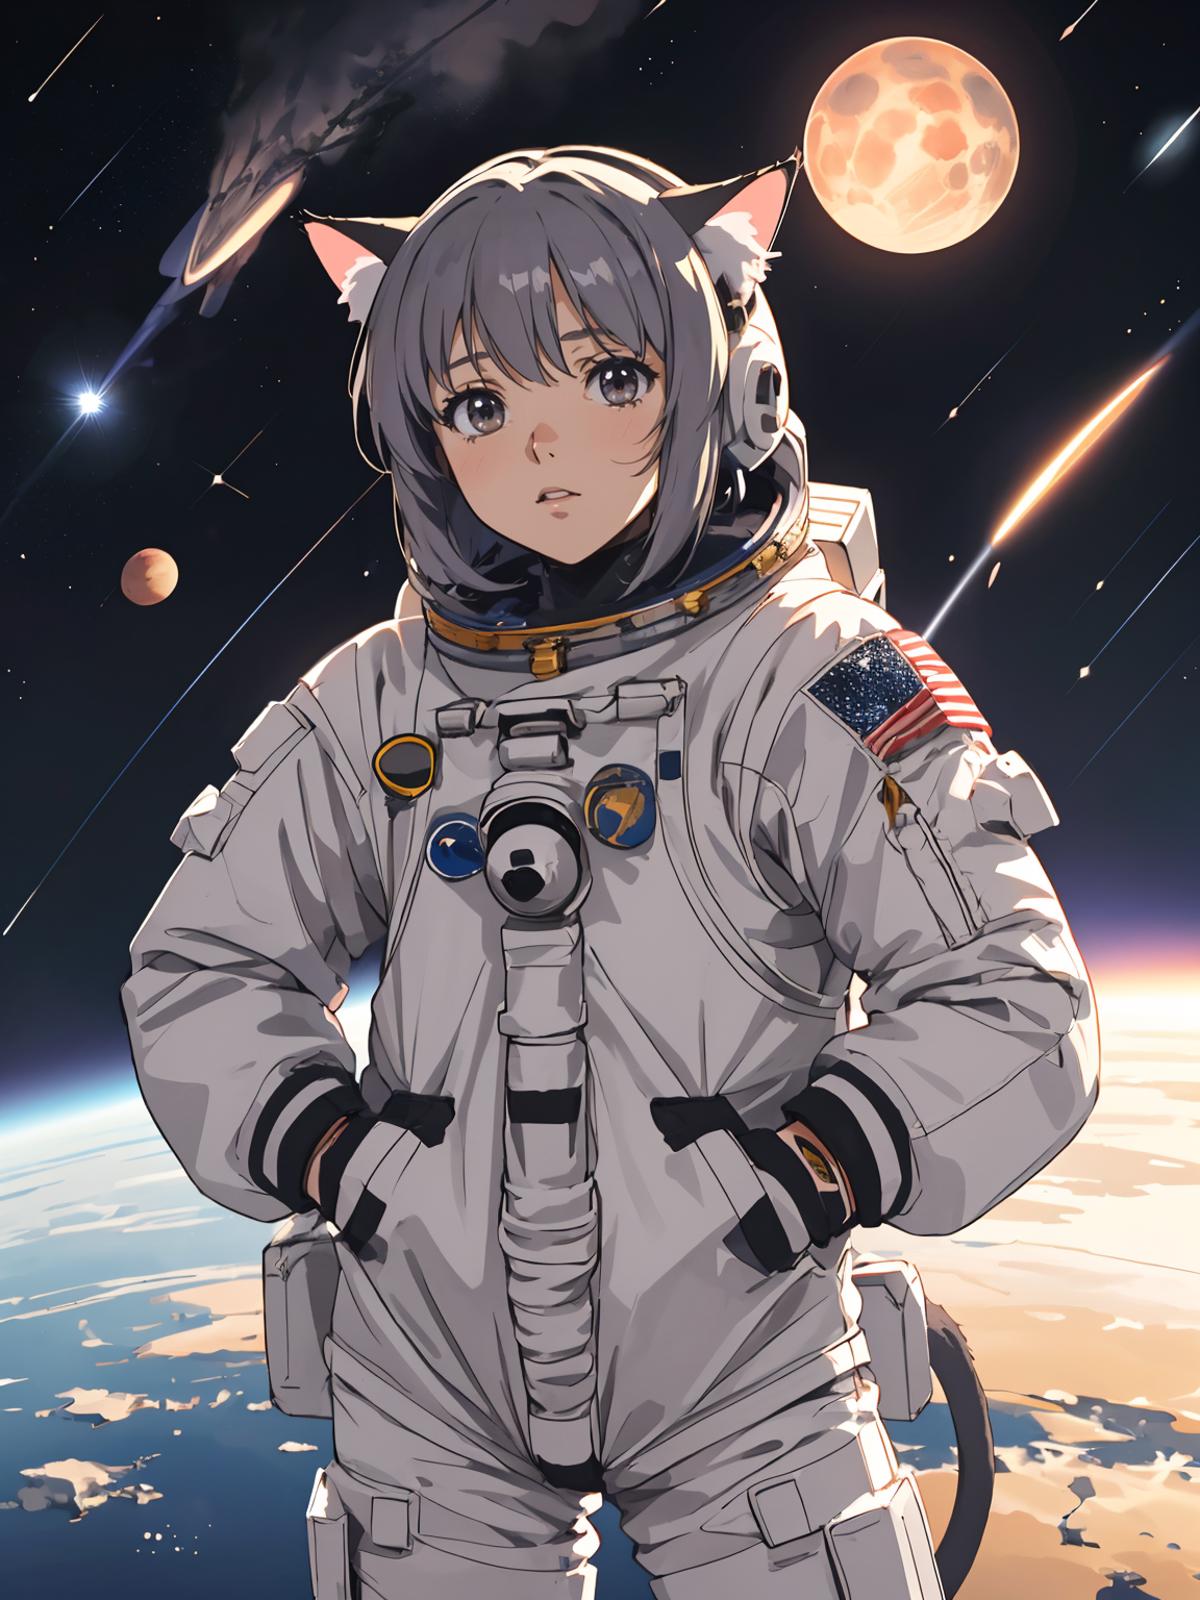 Anime Character in Space Suit with American Flag Patch, Staring into Space.